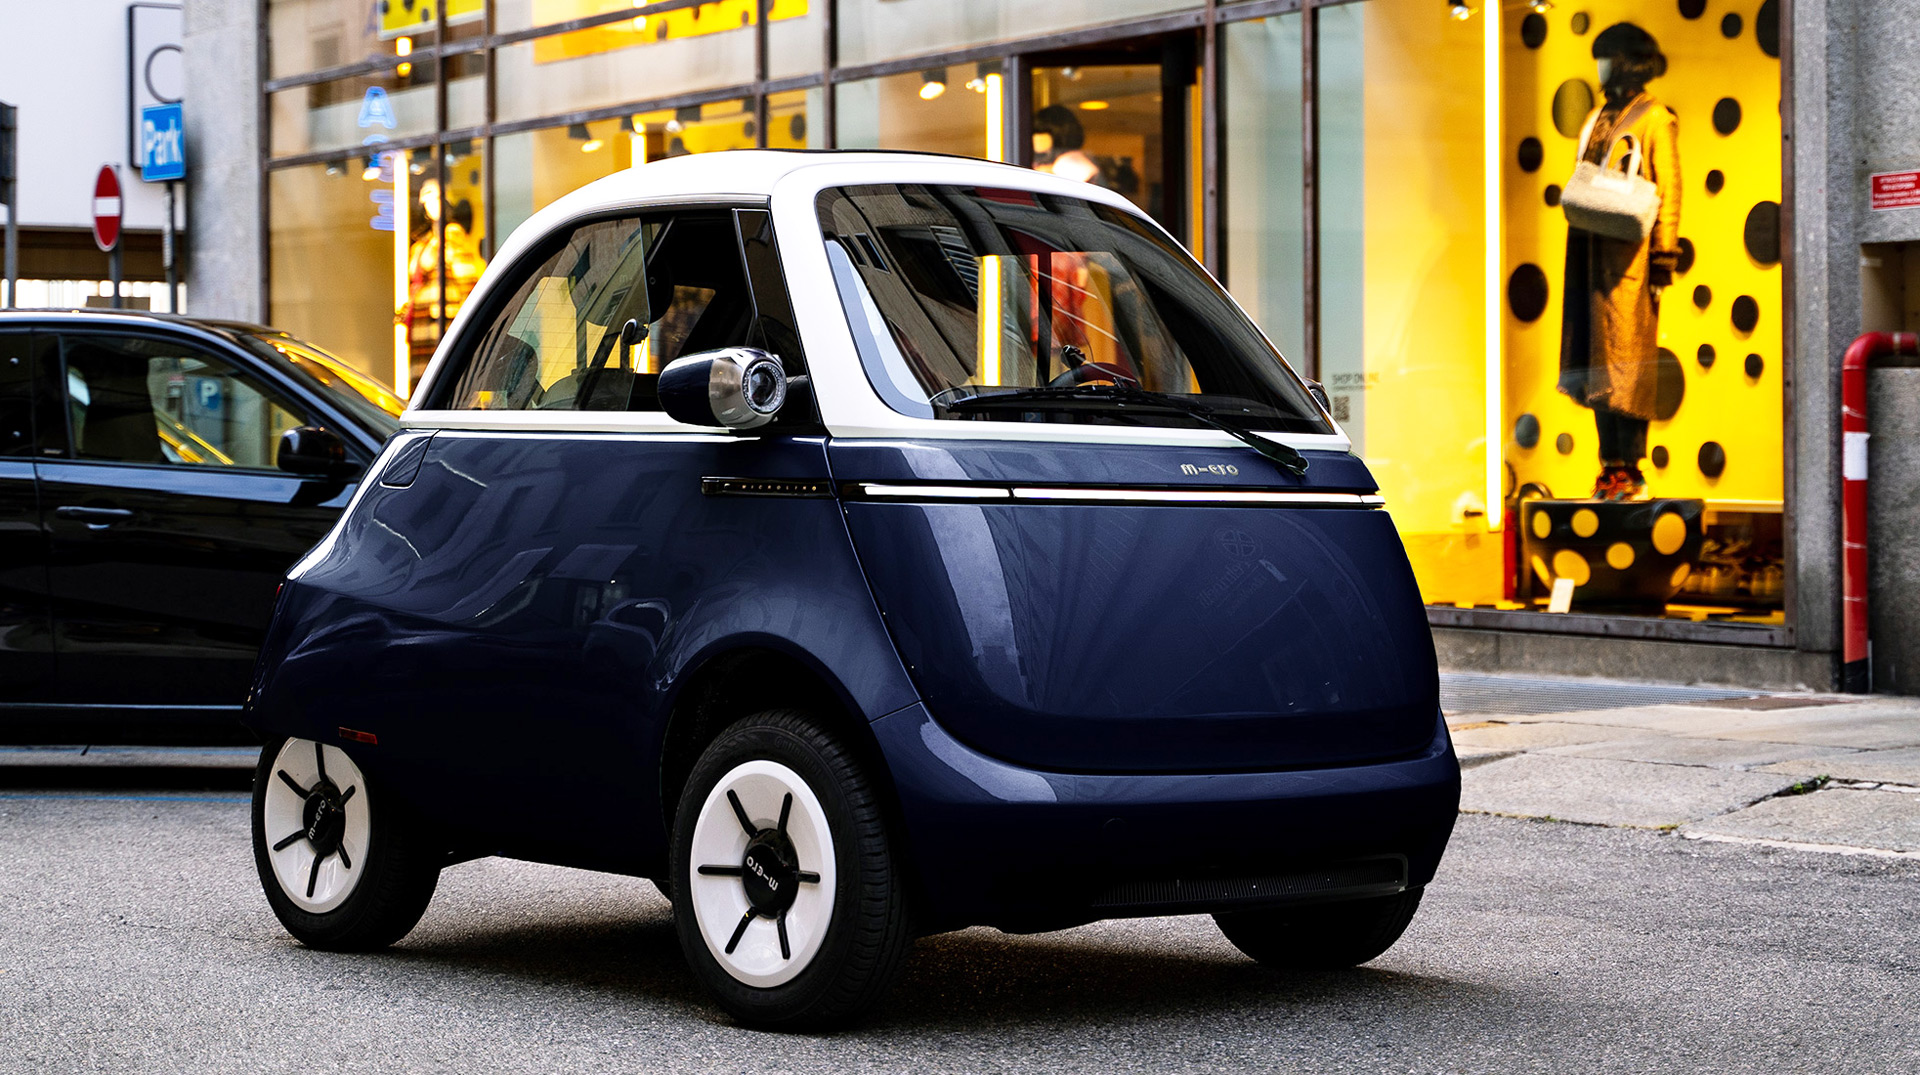 Microlino modern Isetta ready to start deliveries